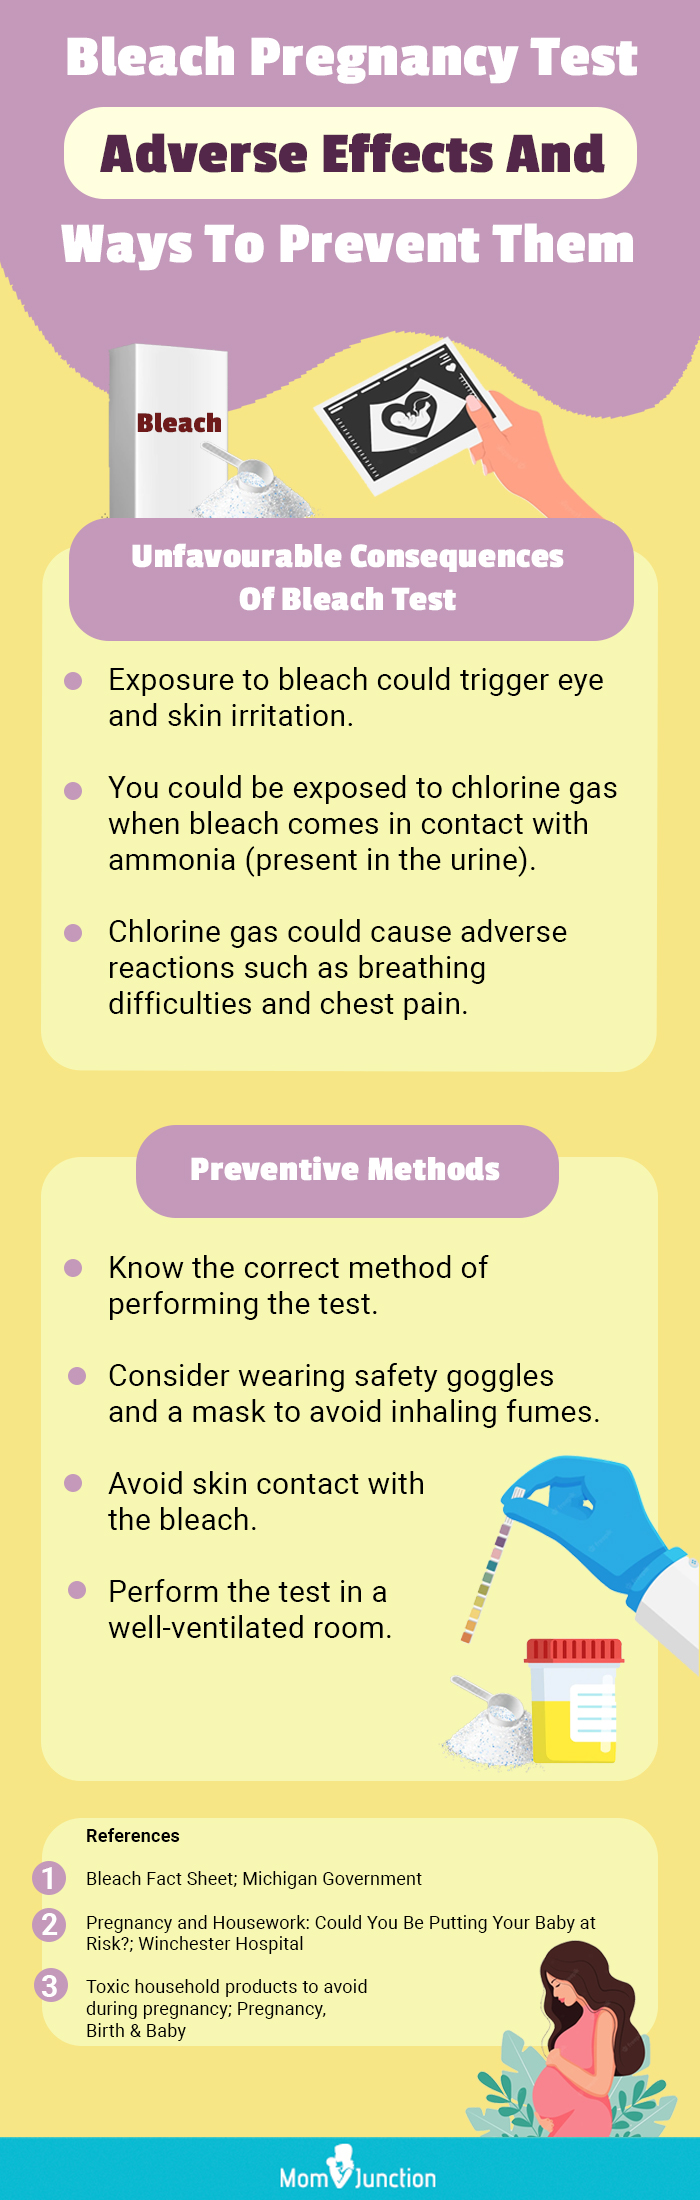 consequences of bleach test and preventive methods (infographic)